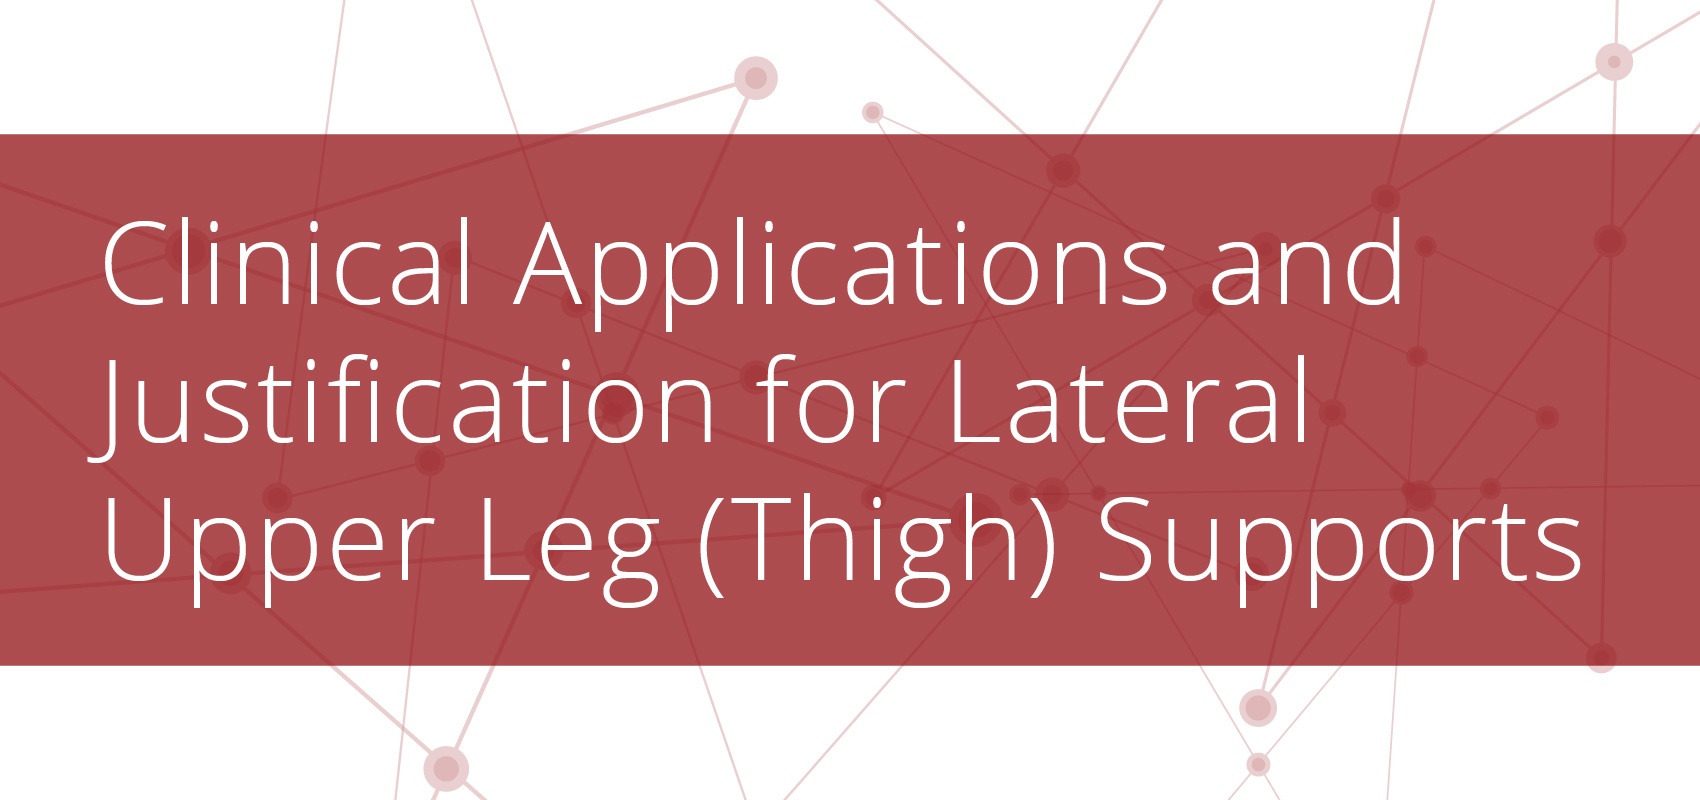 Lateral-Upper-Leg-Supports-Title